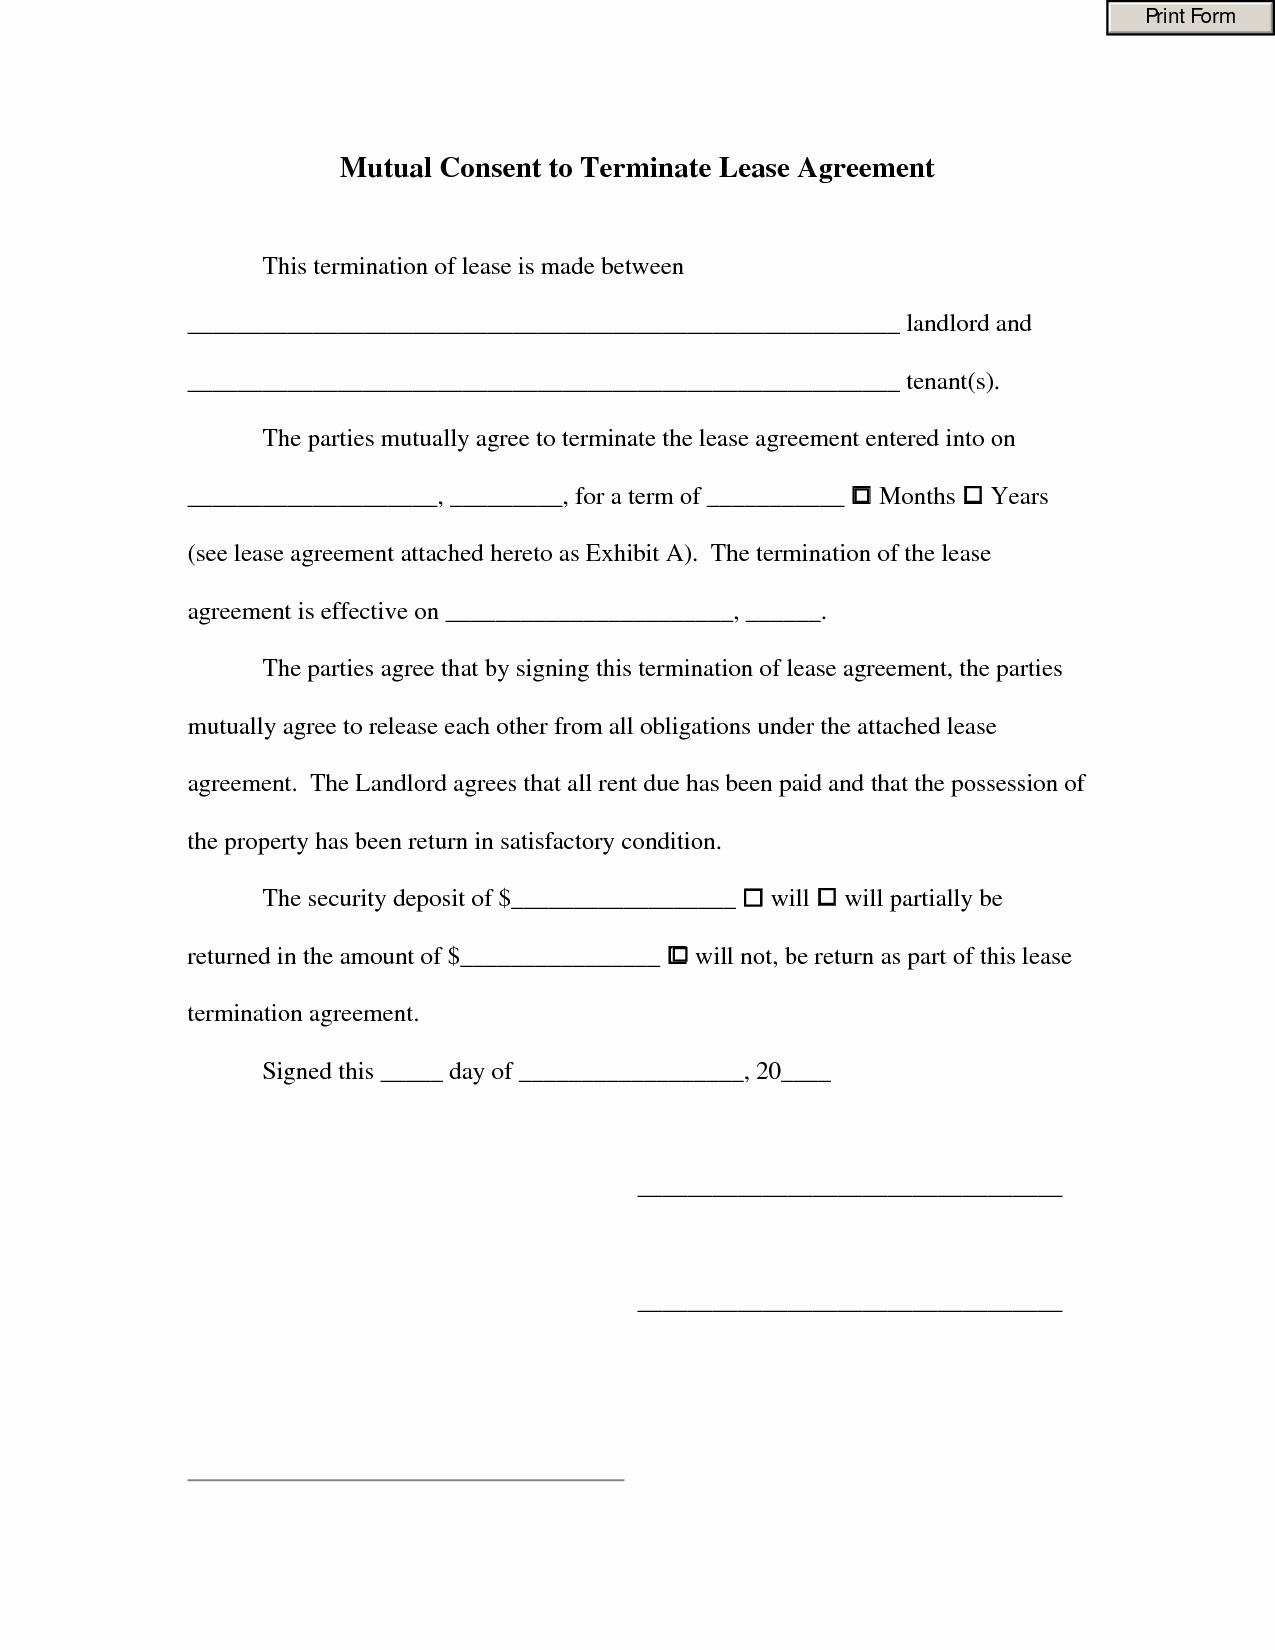 No Compete Contract Template Best Of Mutual Consent to Terminate Lease Agreement by Fdh56iuoui